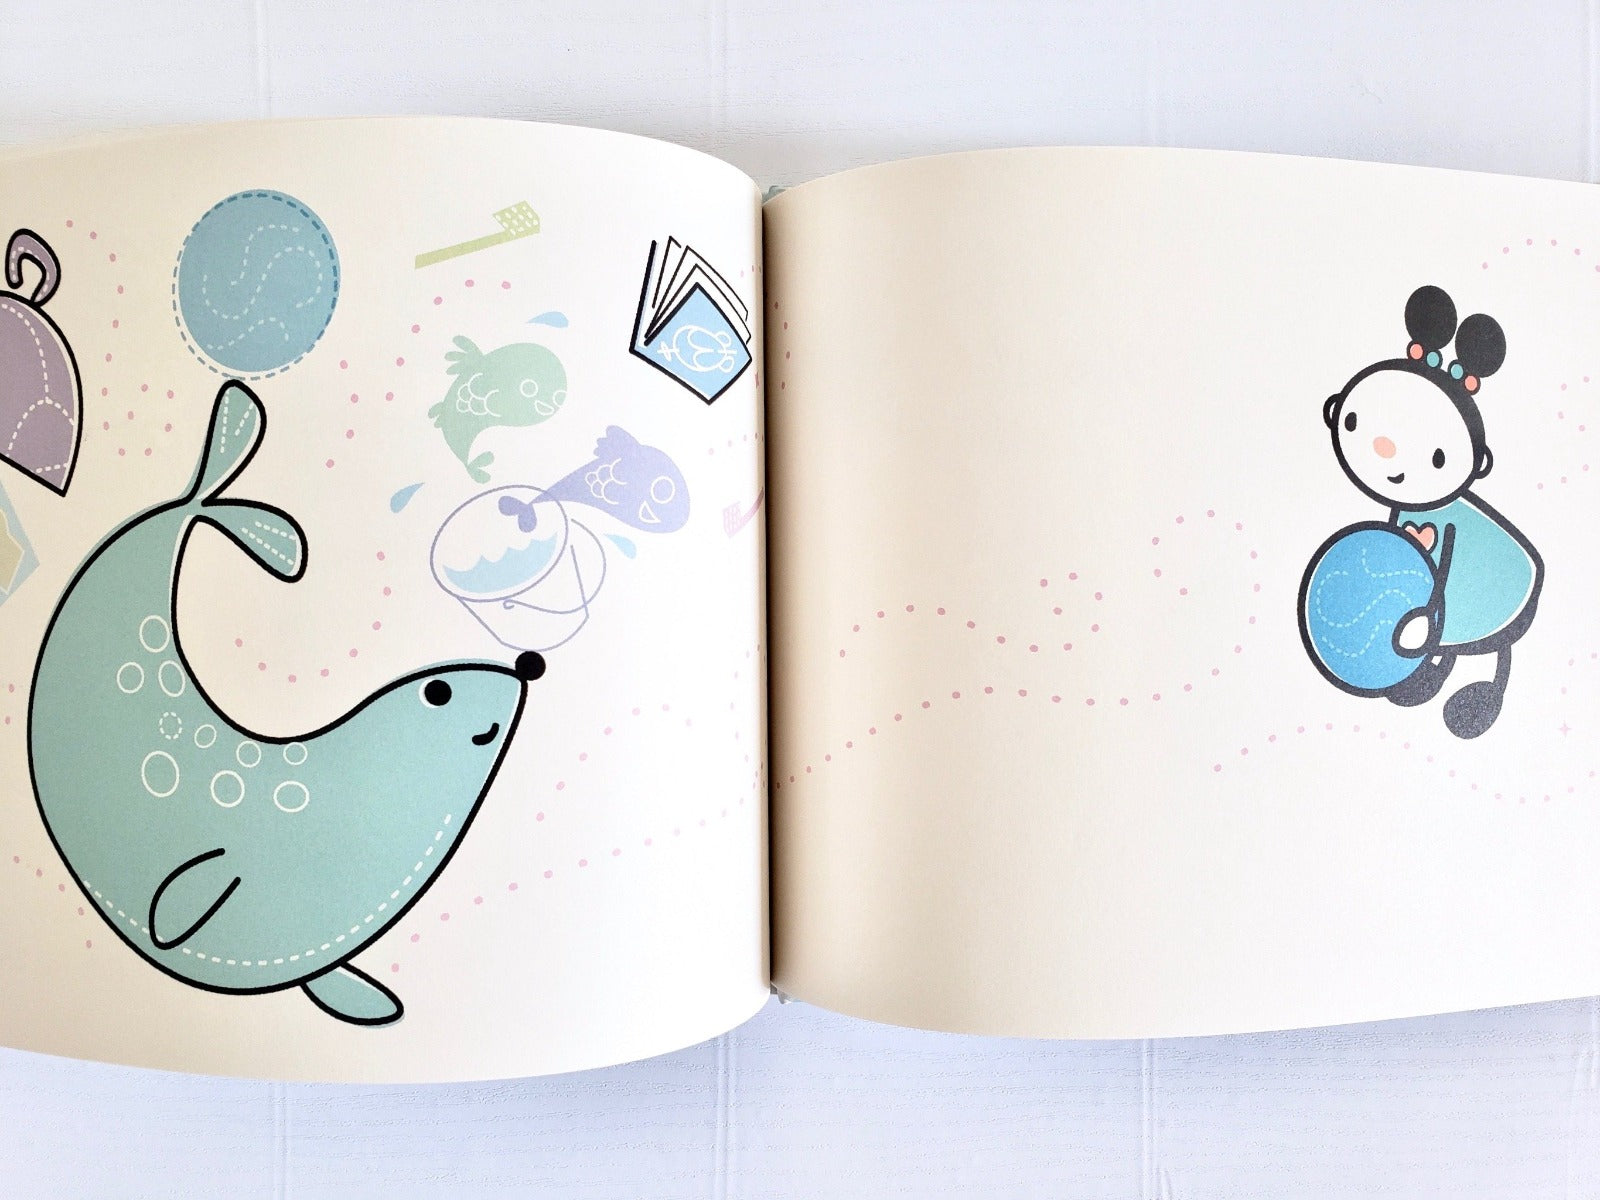 Peanut & Fifi Have A Ball inside pages